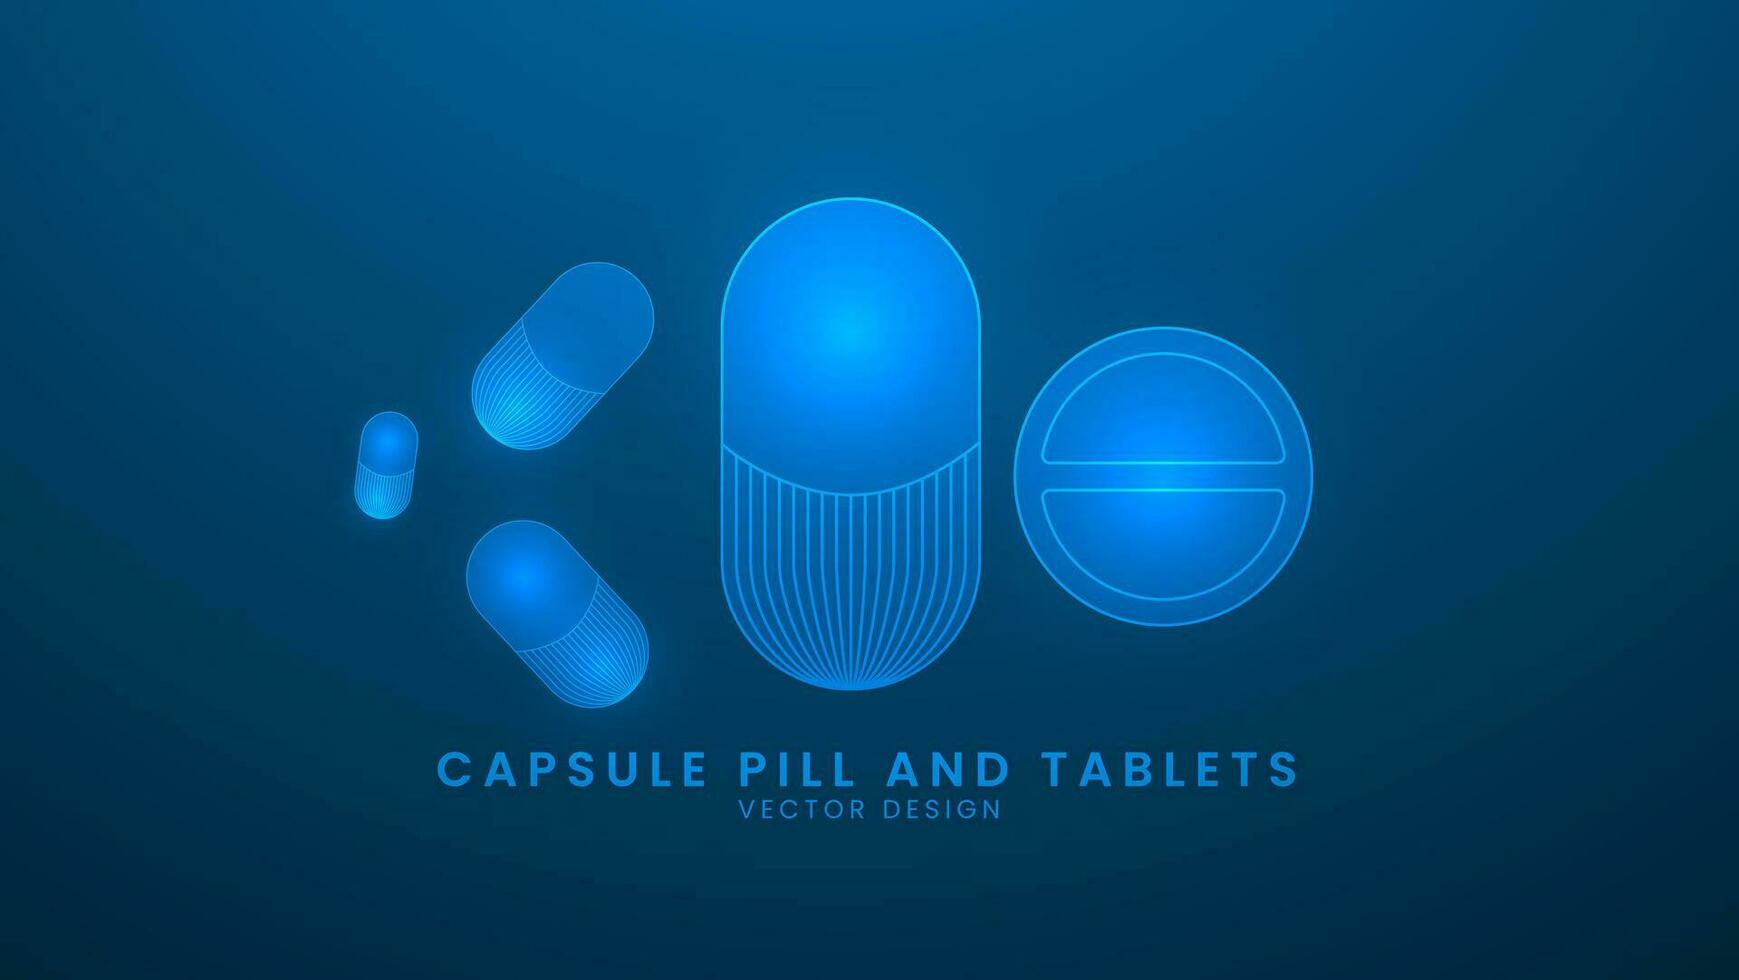 Pharmaceutical medical pills, capsules, and tablets. Healthcare and medicine concept. Vector illustration with light effect and neon